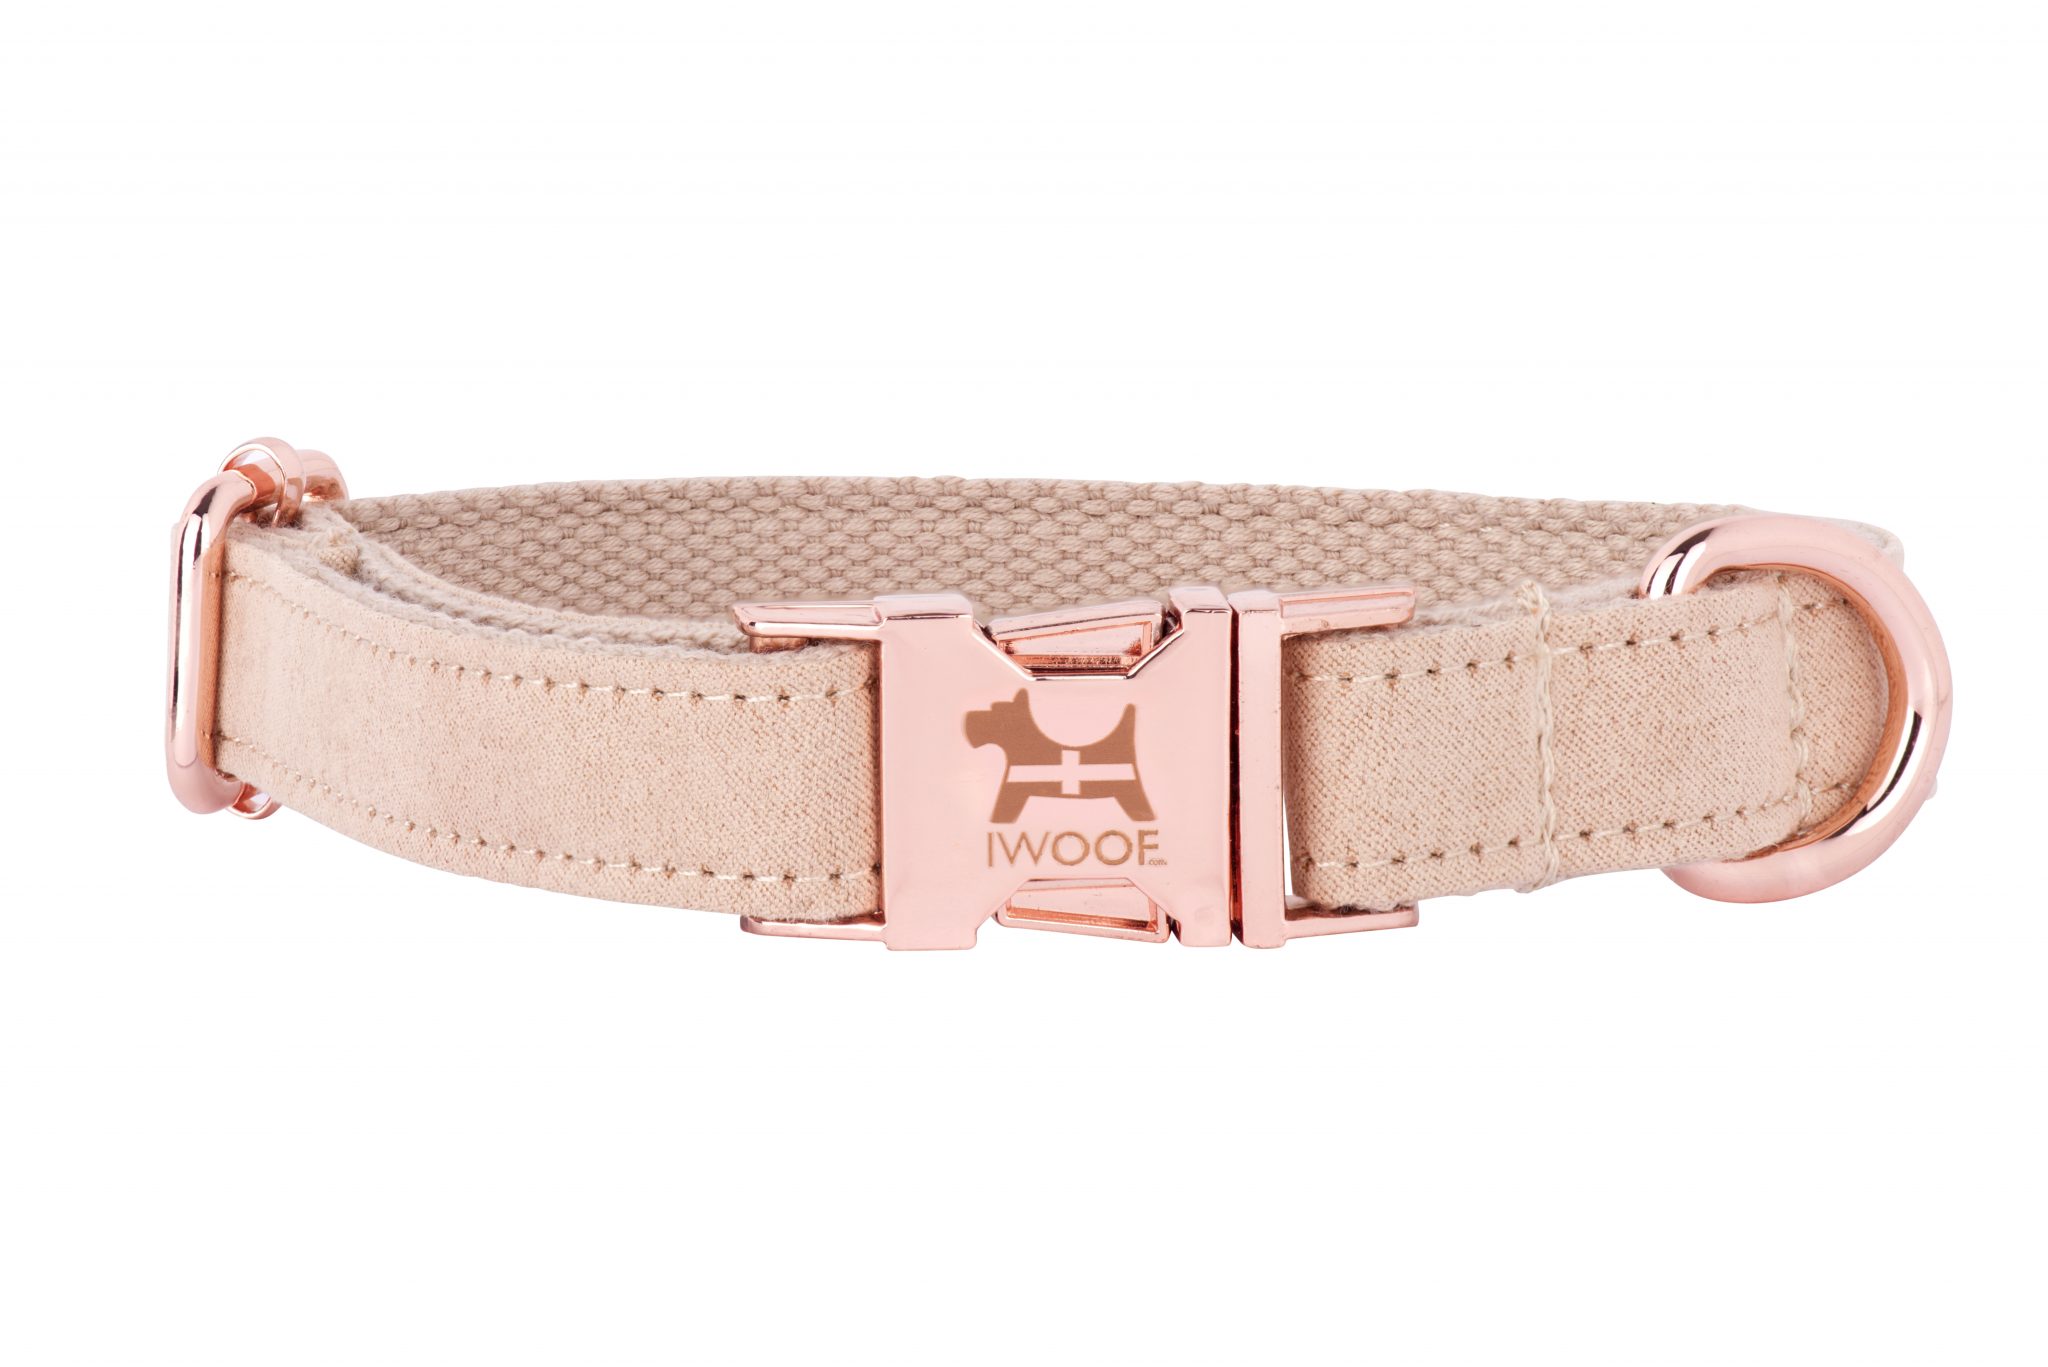 Cornish Sand designer dog collar by IWOOF with rose gold fittings